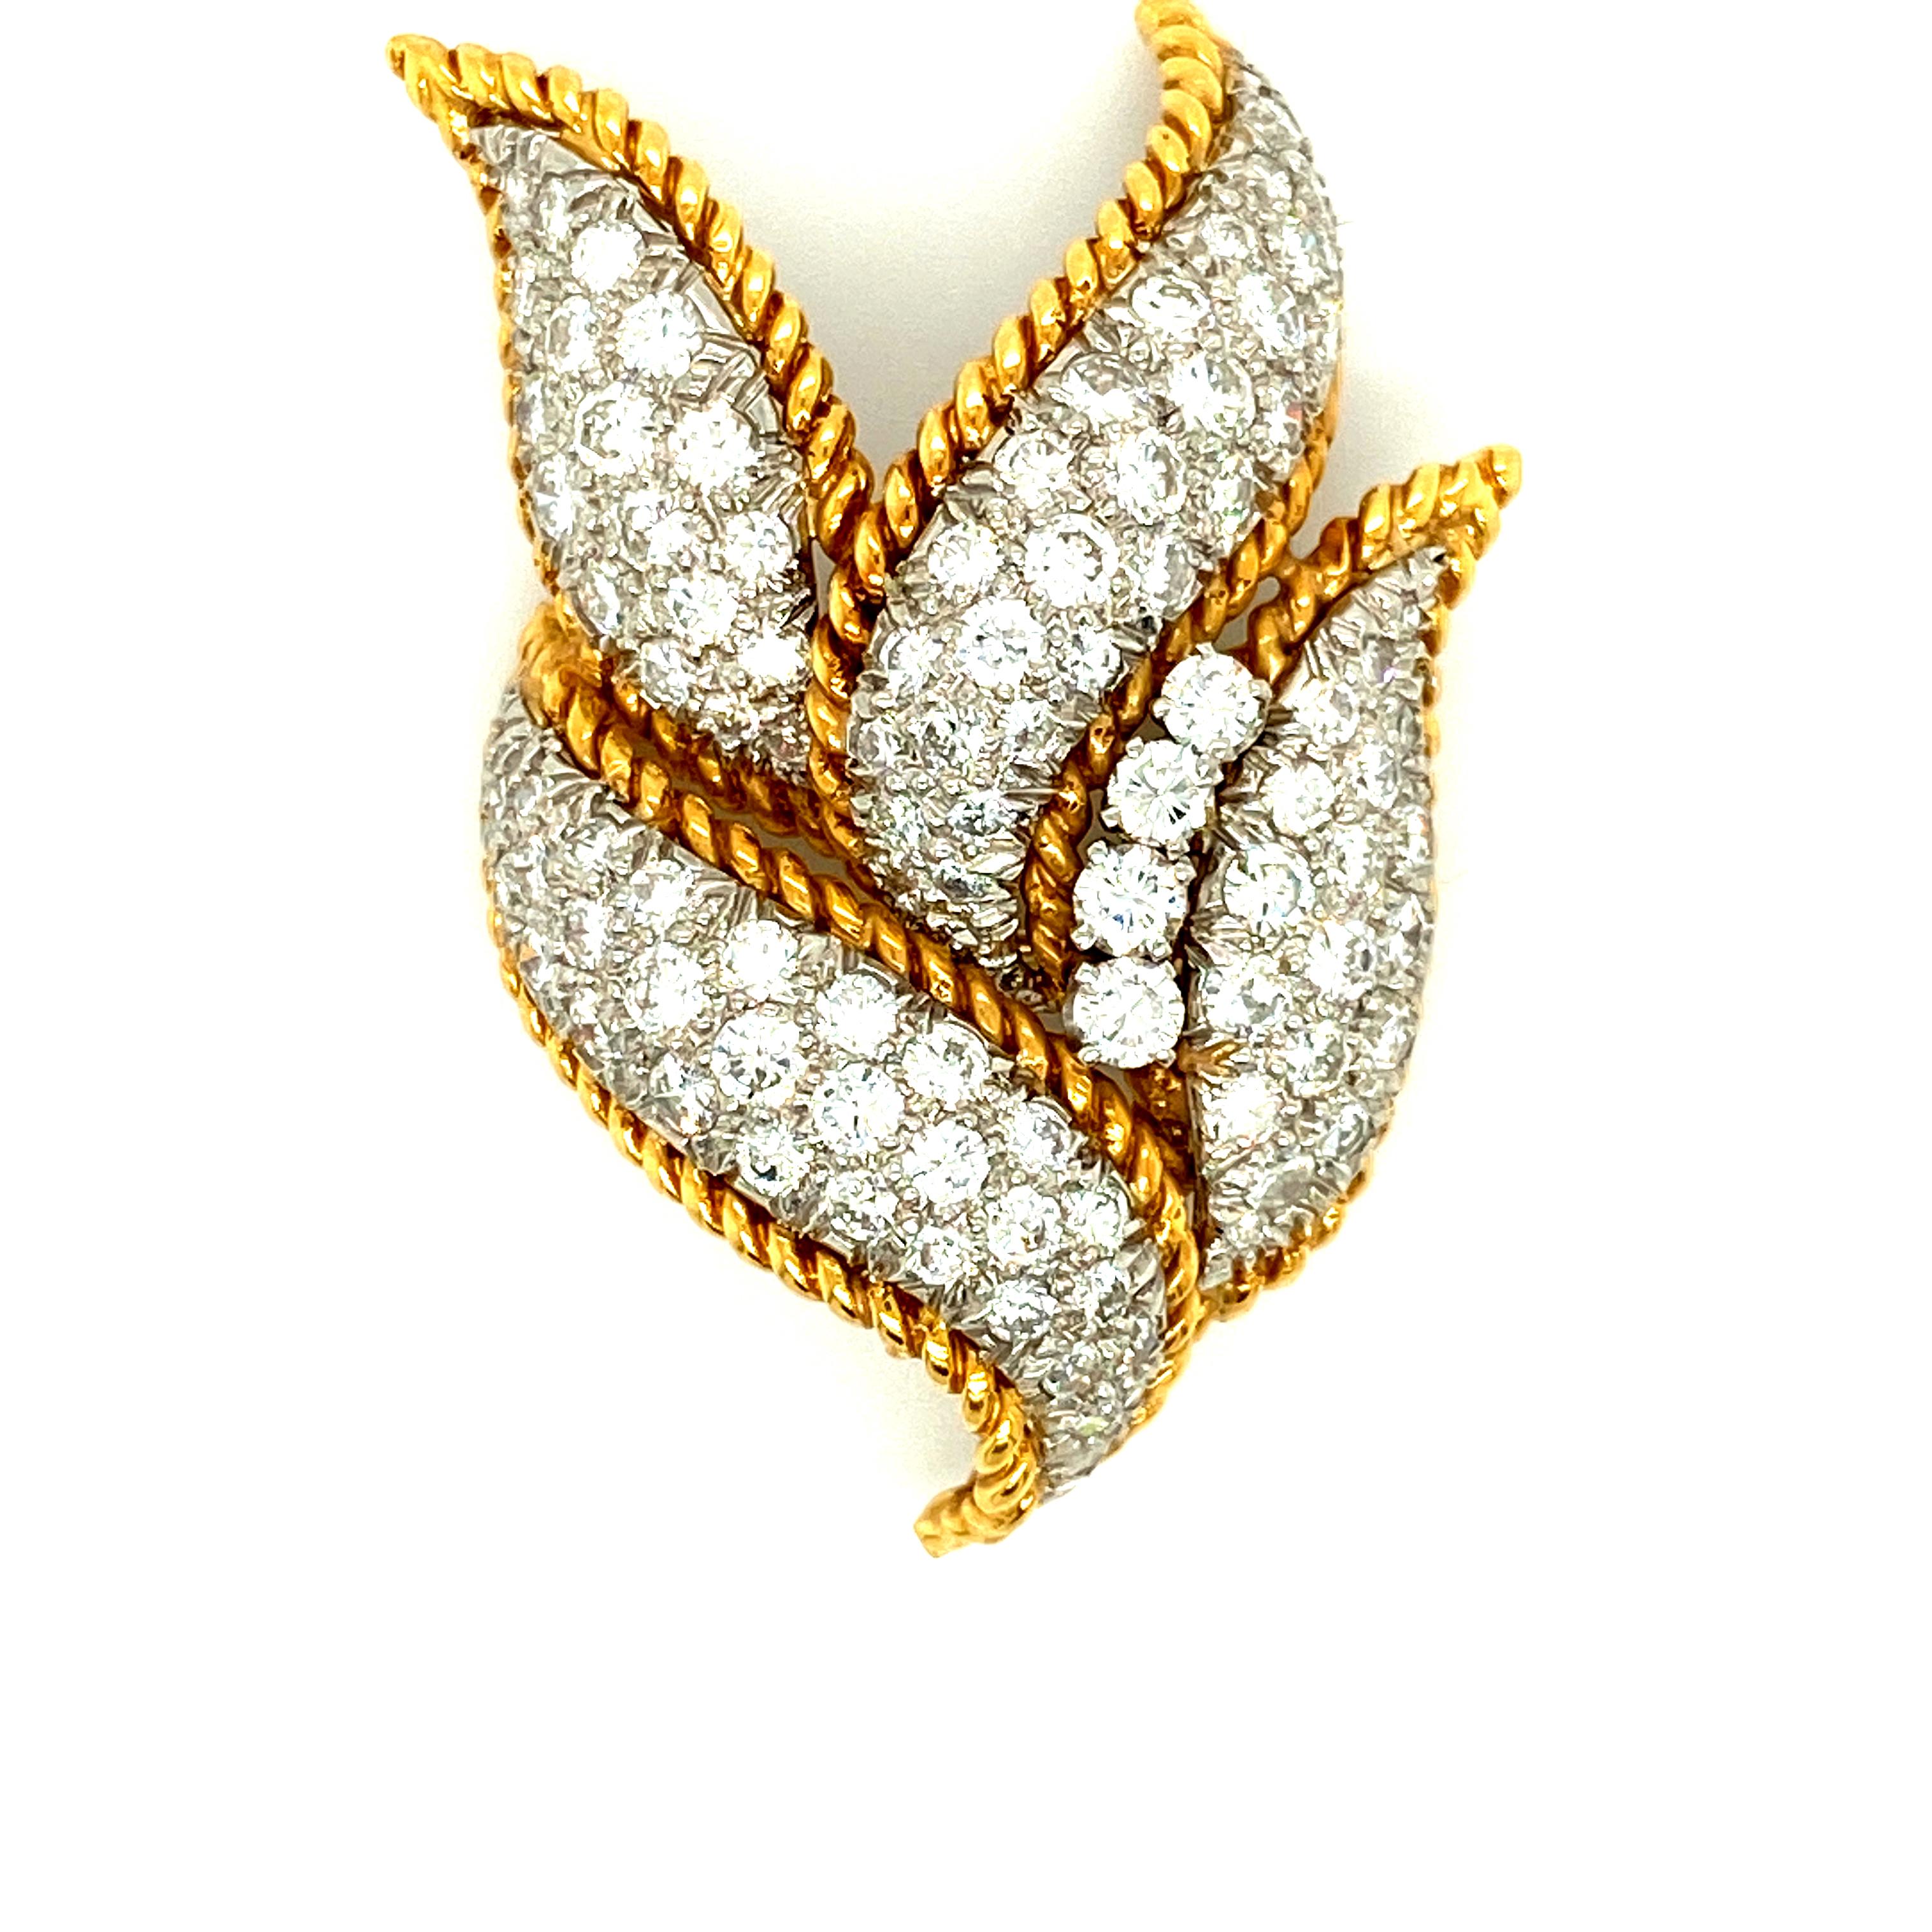 This David Webb brooch was constructed with curved platinum settings housing approximately 5cts of round brilliant diamonds, bounded by 18k yellow gold in a 'woven', rope-like texture in an overall design resembling a cluster of leaves.  This brooch